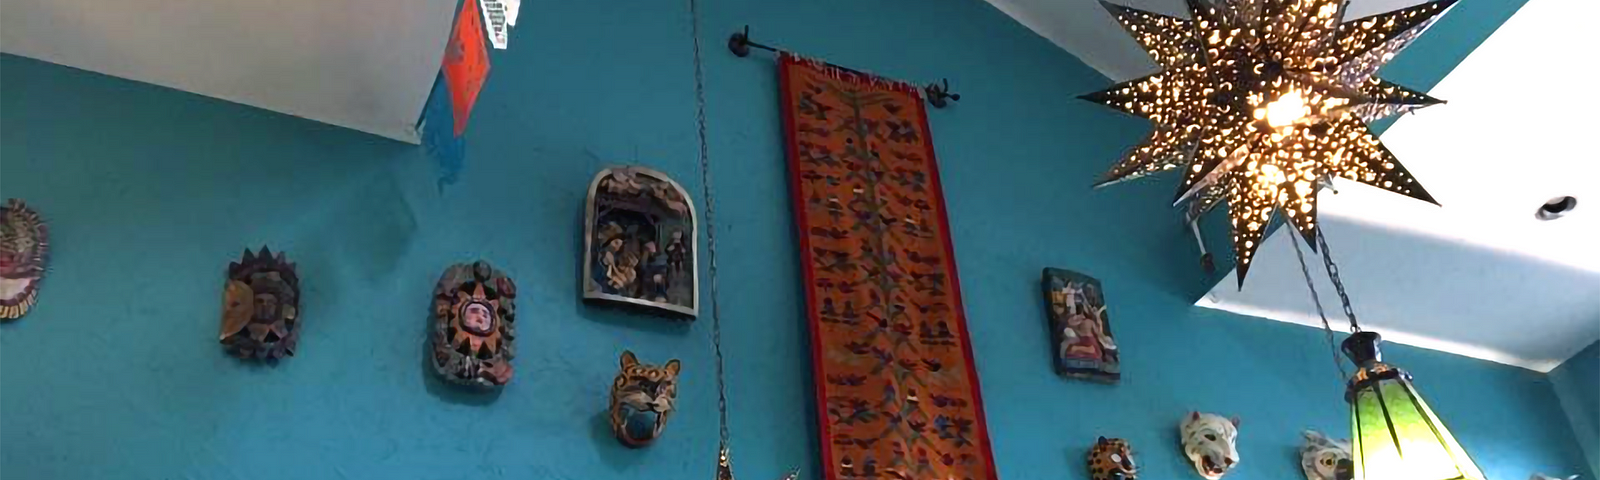 Decoration from La Palapa, Mexican Restaurant in Pittsburgh Source: La Palapa on Facebook